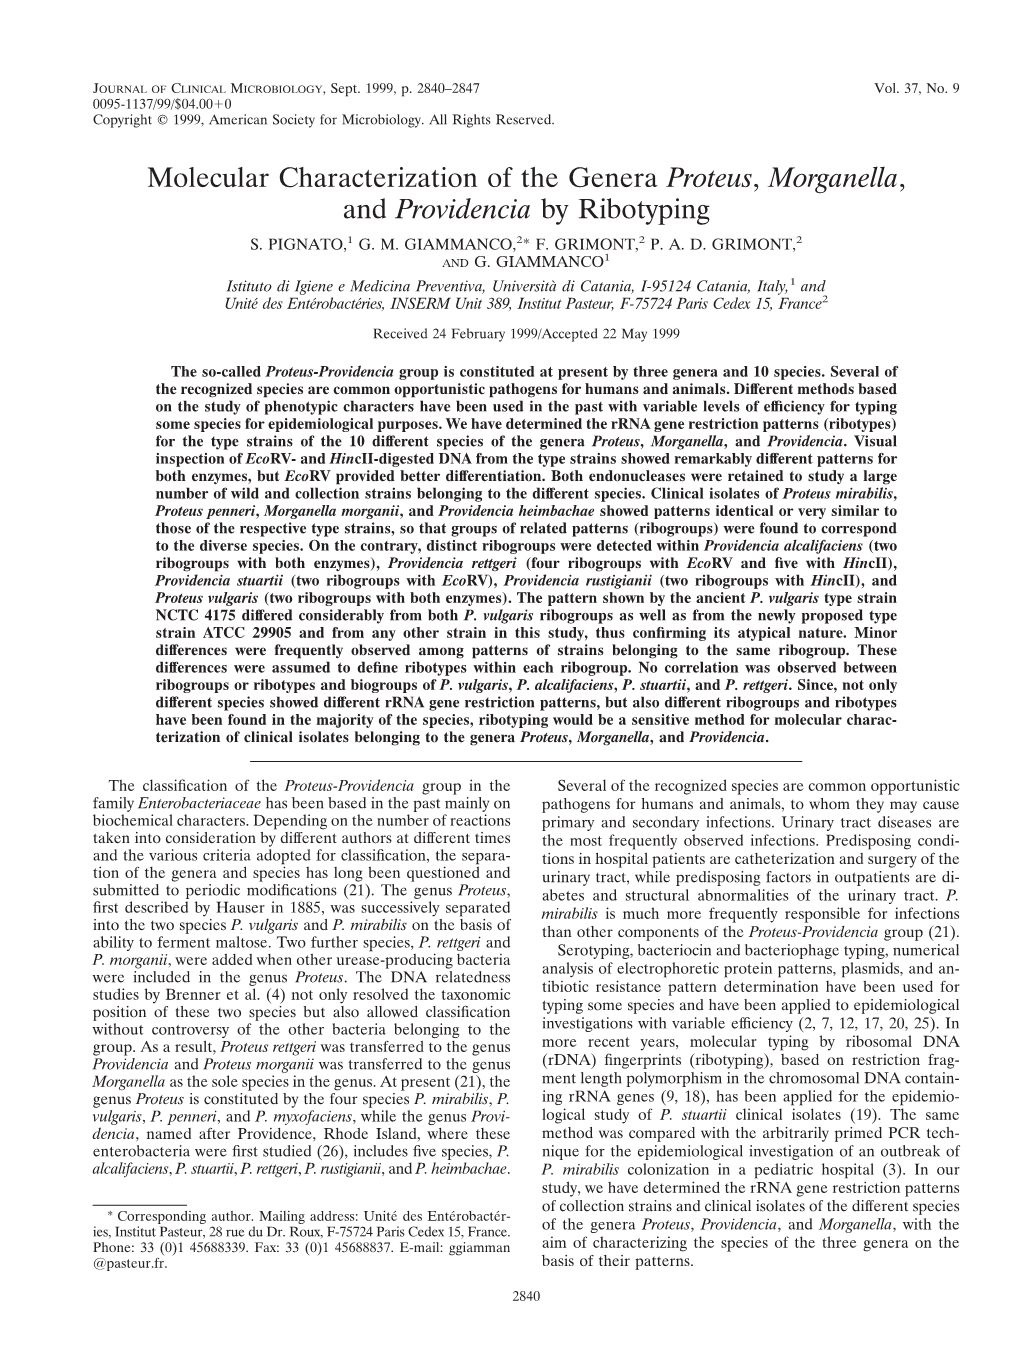 Molecular Characterization of the Genera Proteus, Morganella, and Providencia by Ribotyping S